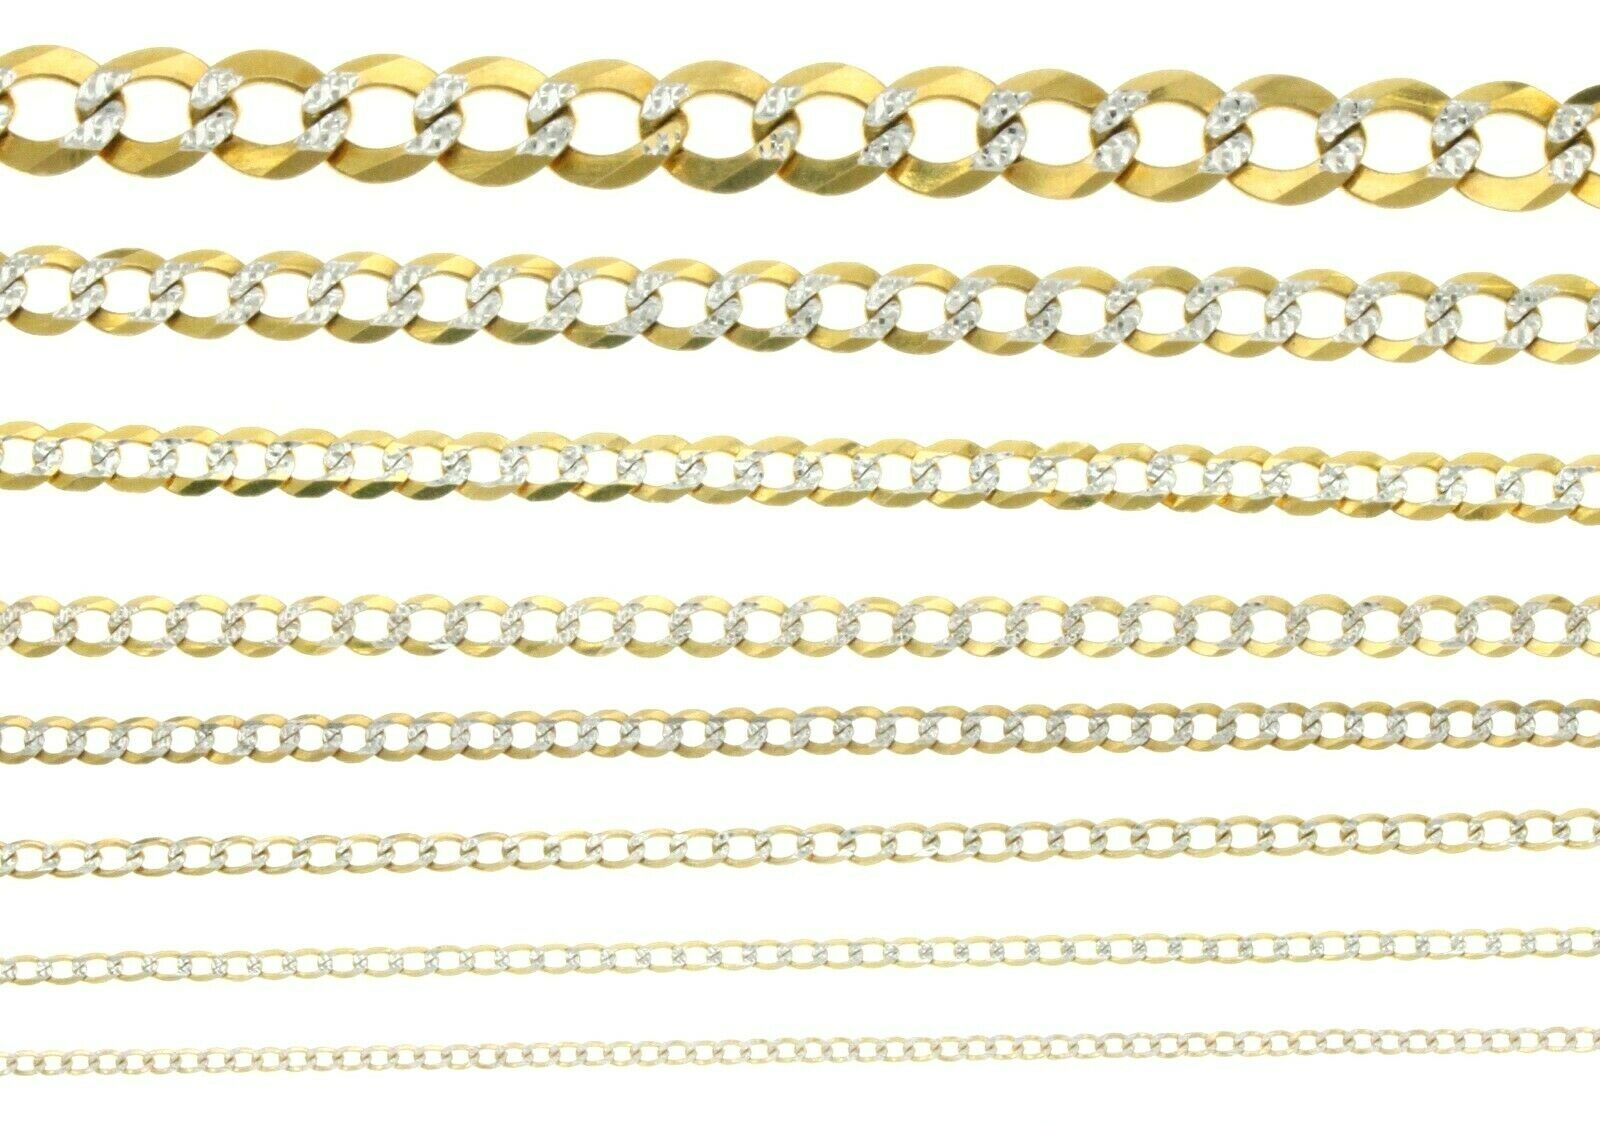 New Real 14K Solid Yellow Gold White Pave Curb Link Cuban chain Necklace 16-24